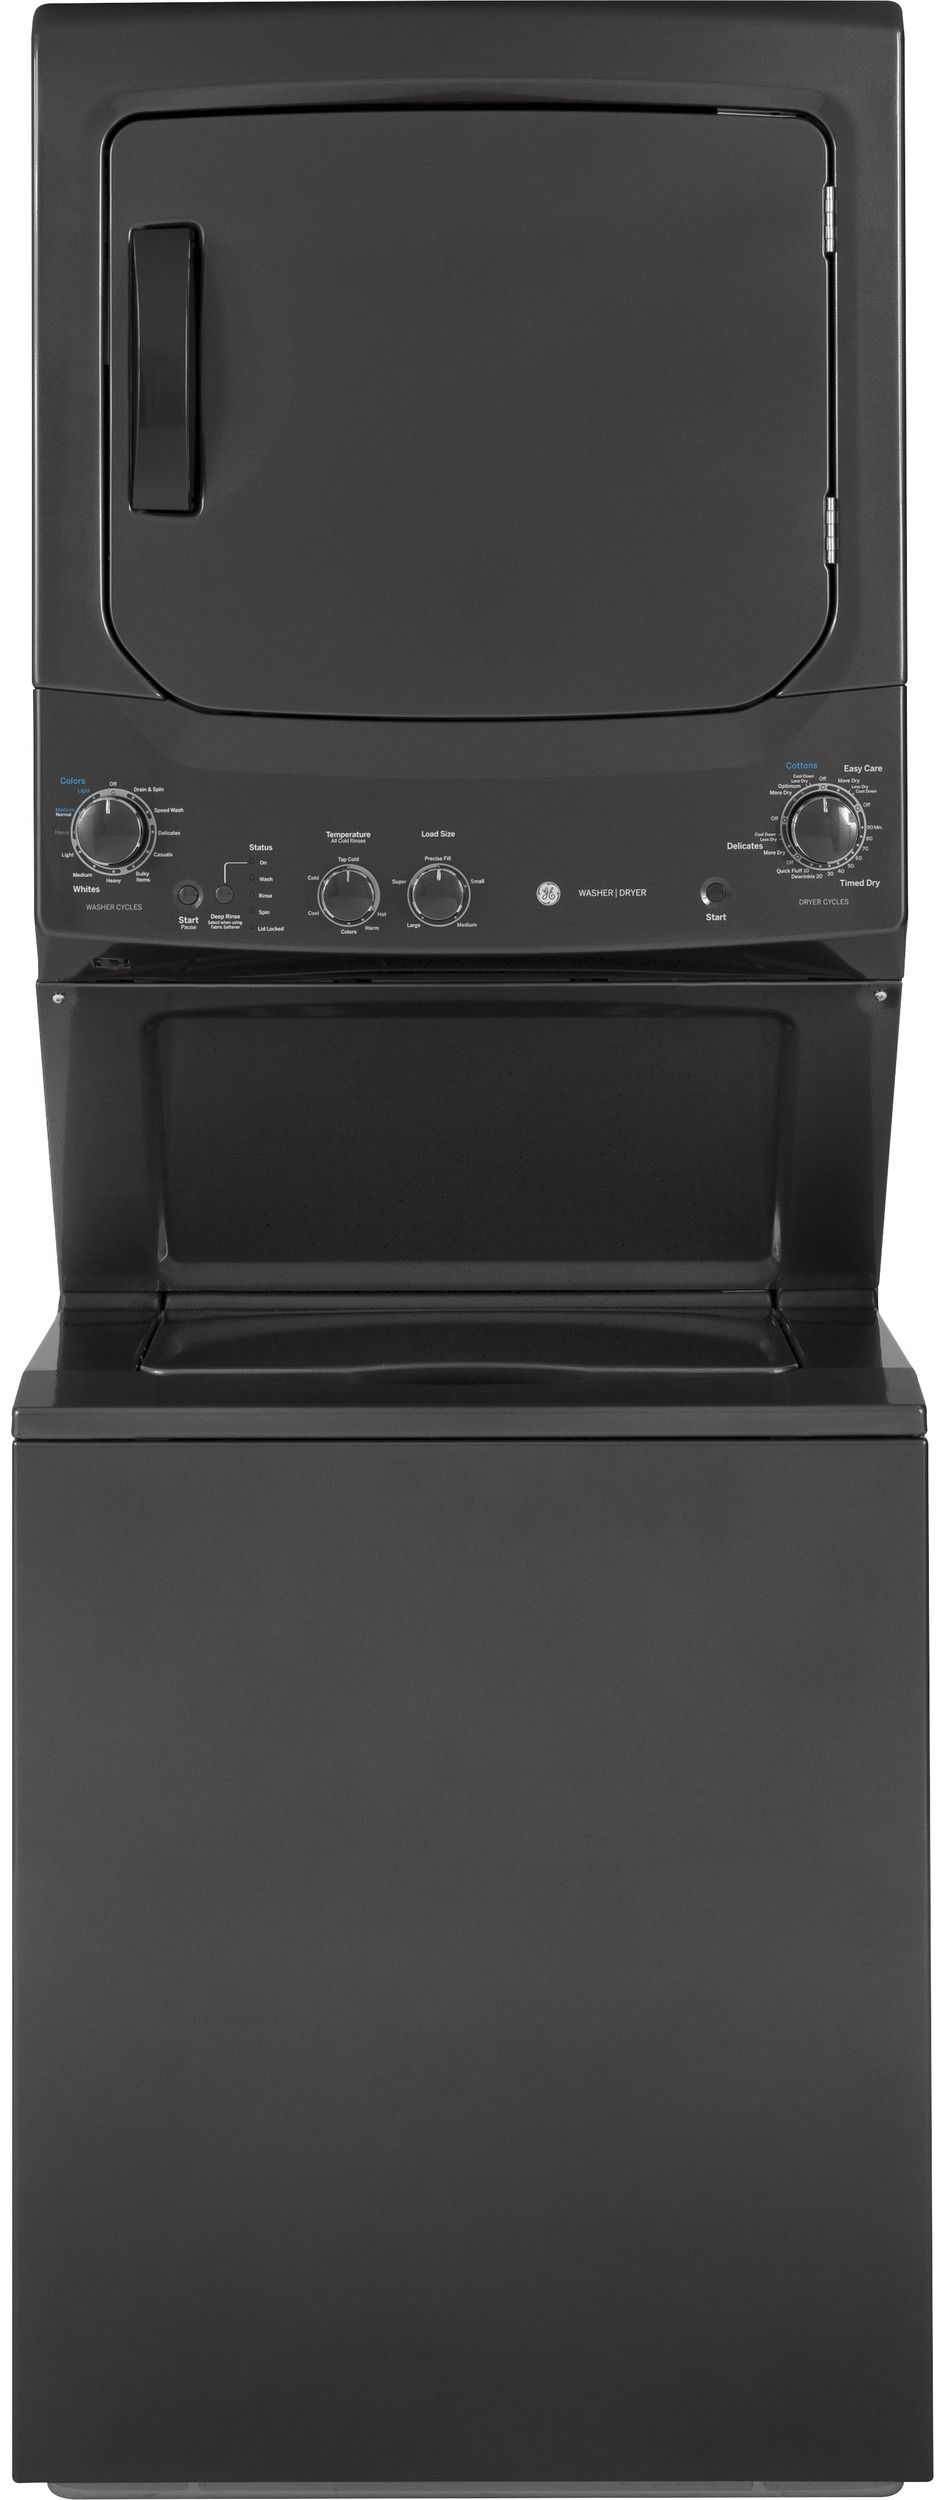 GE® Unitized Spacemaker® Stack Laundry-Diamond Gray